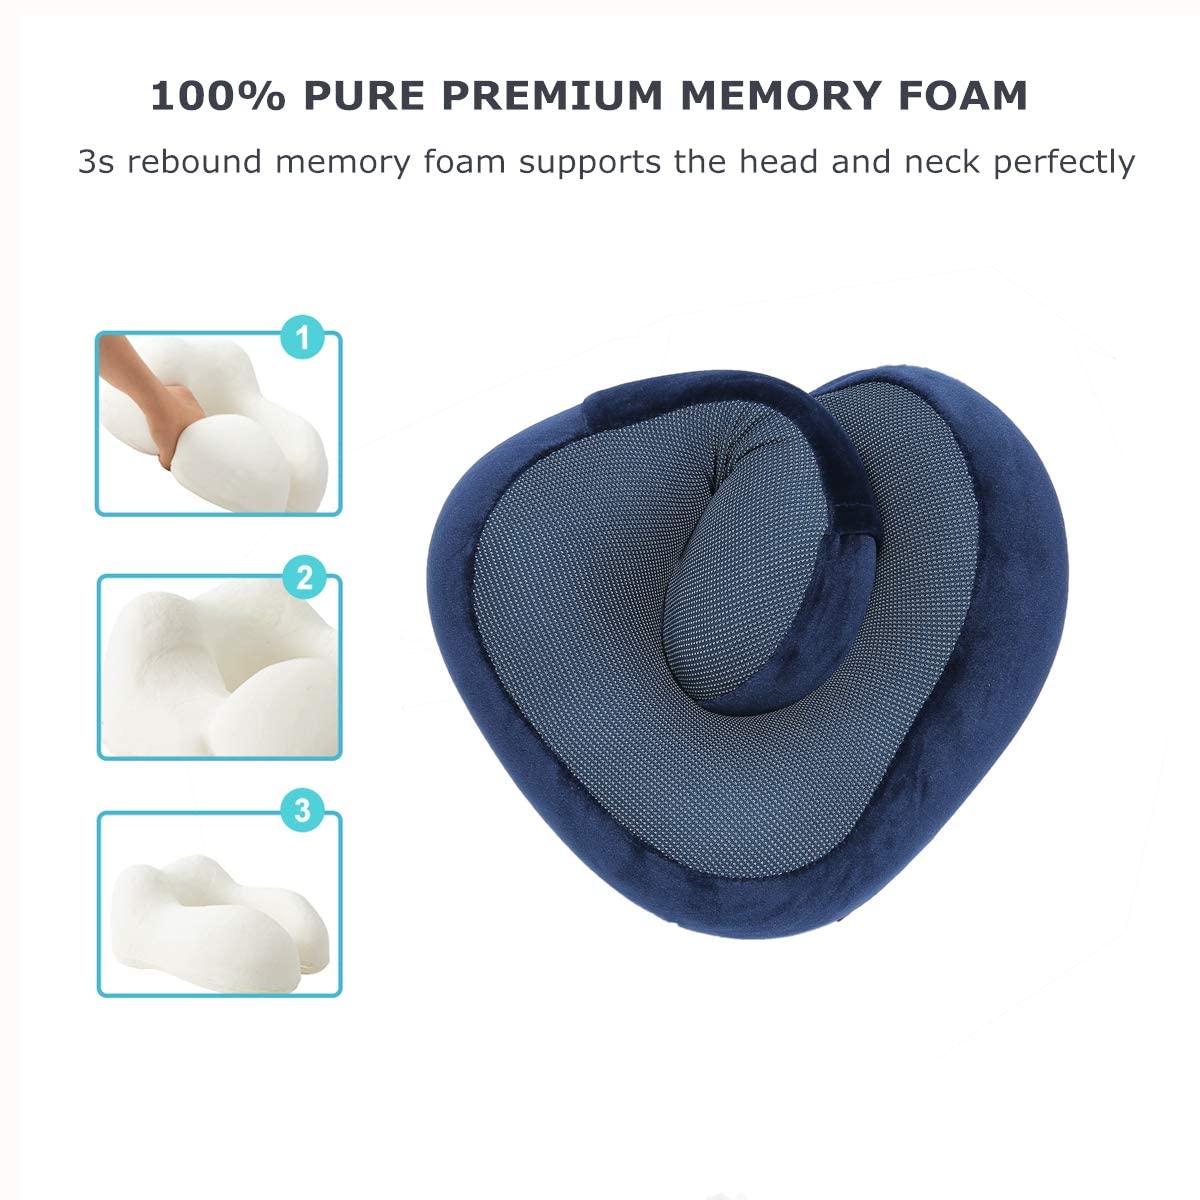 VIO Travel Pillow 100% Pure Memory Foam Neck Pillow with Machine Washable Cover, Airplane Travel Kit (BLUE)